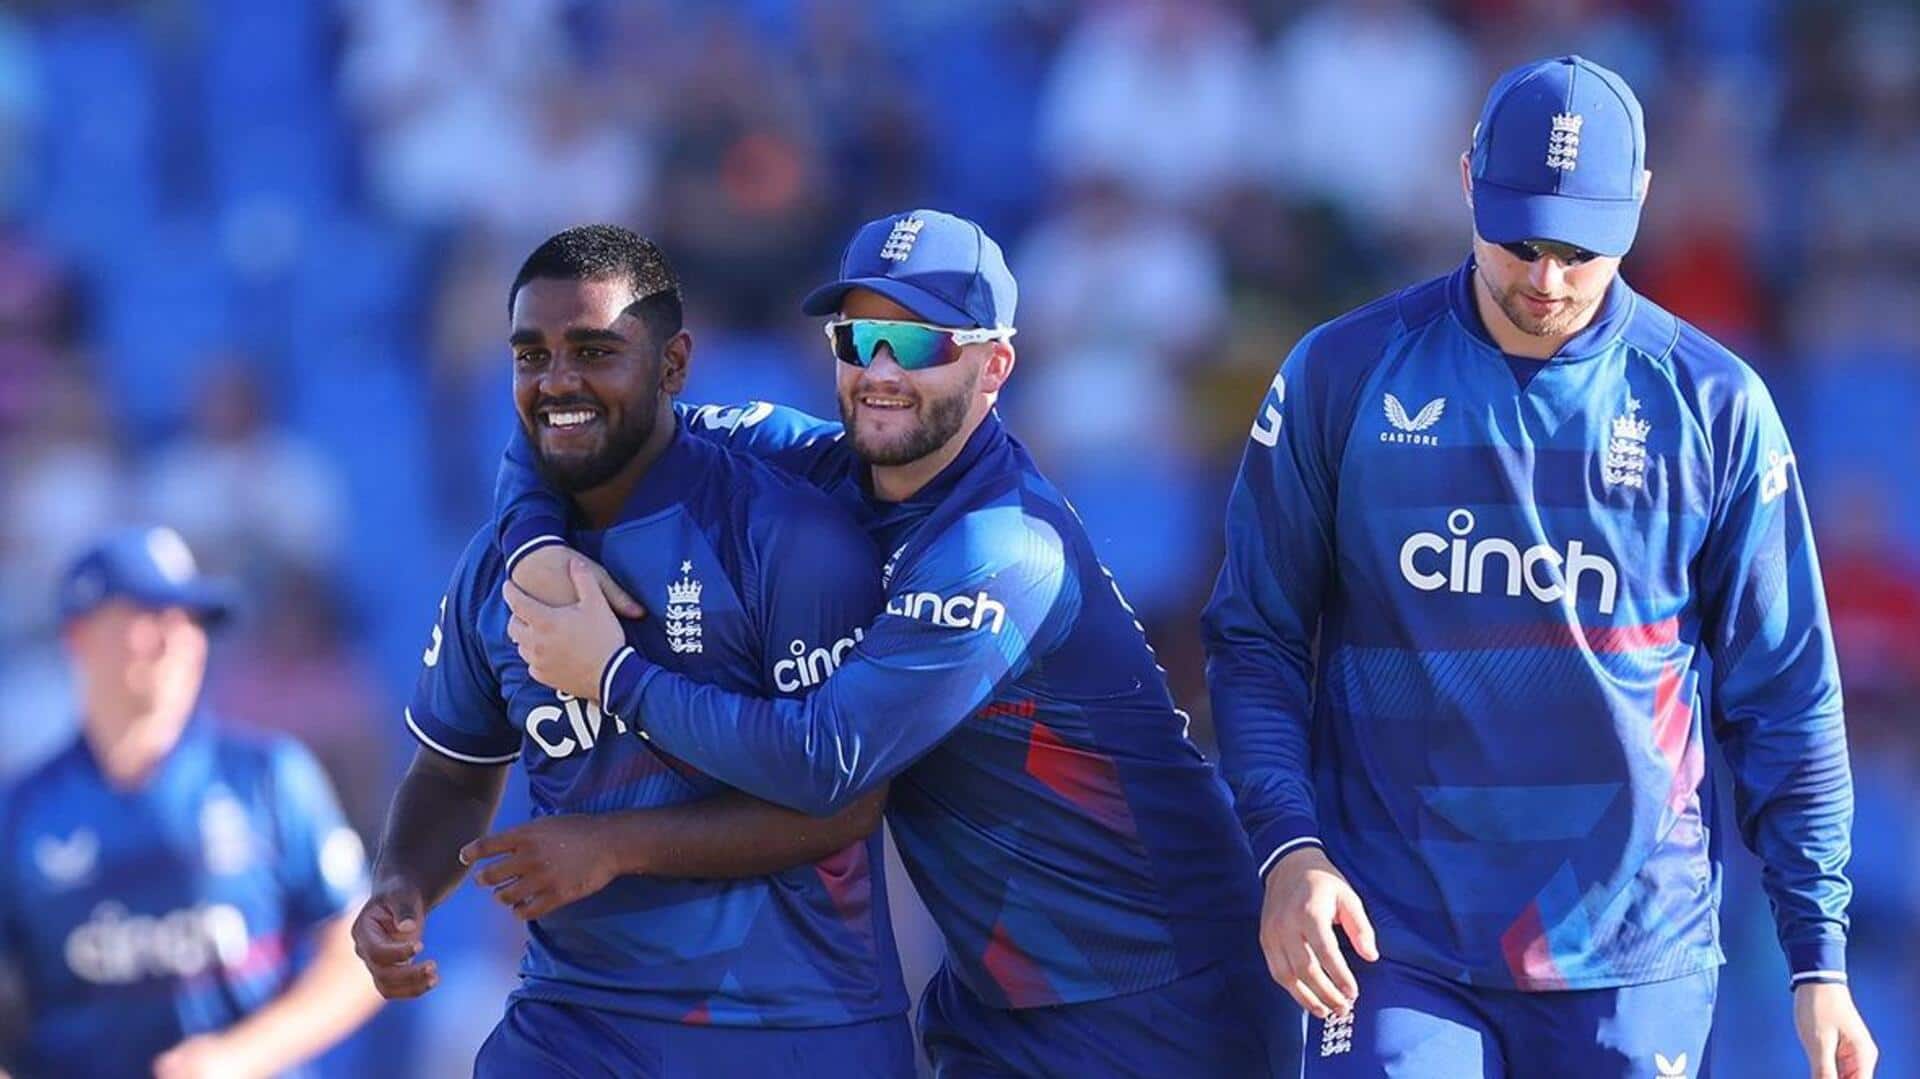 England humble West Indies in the second ODI: Key stats